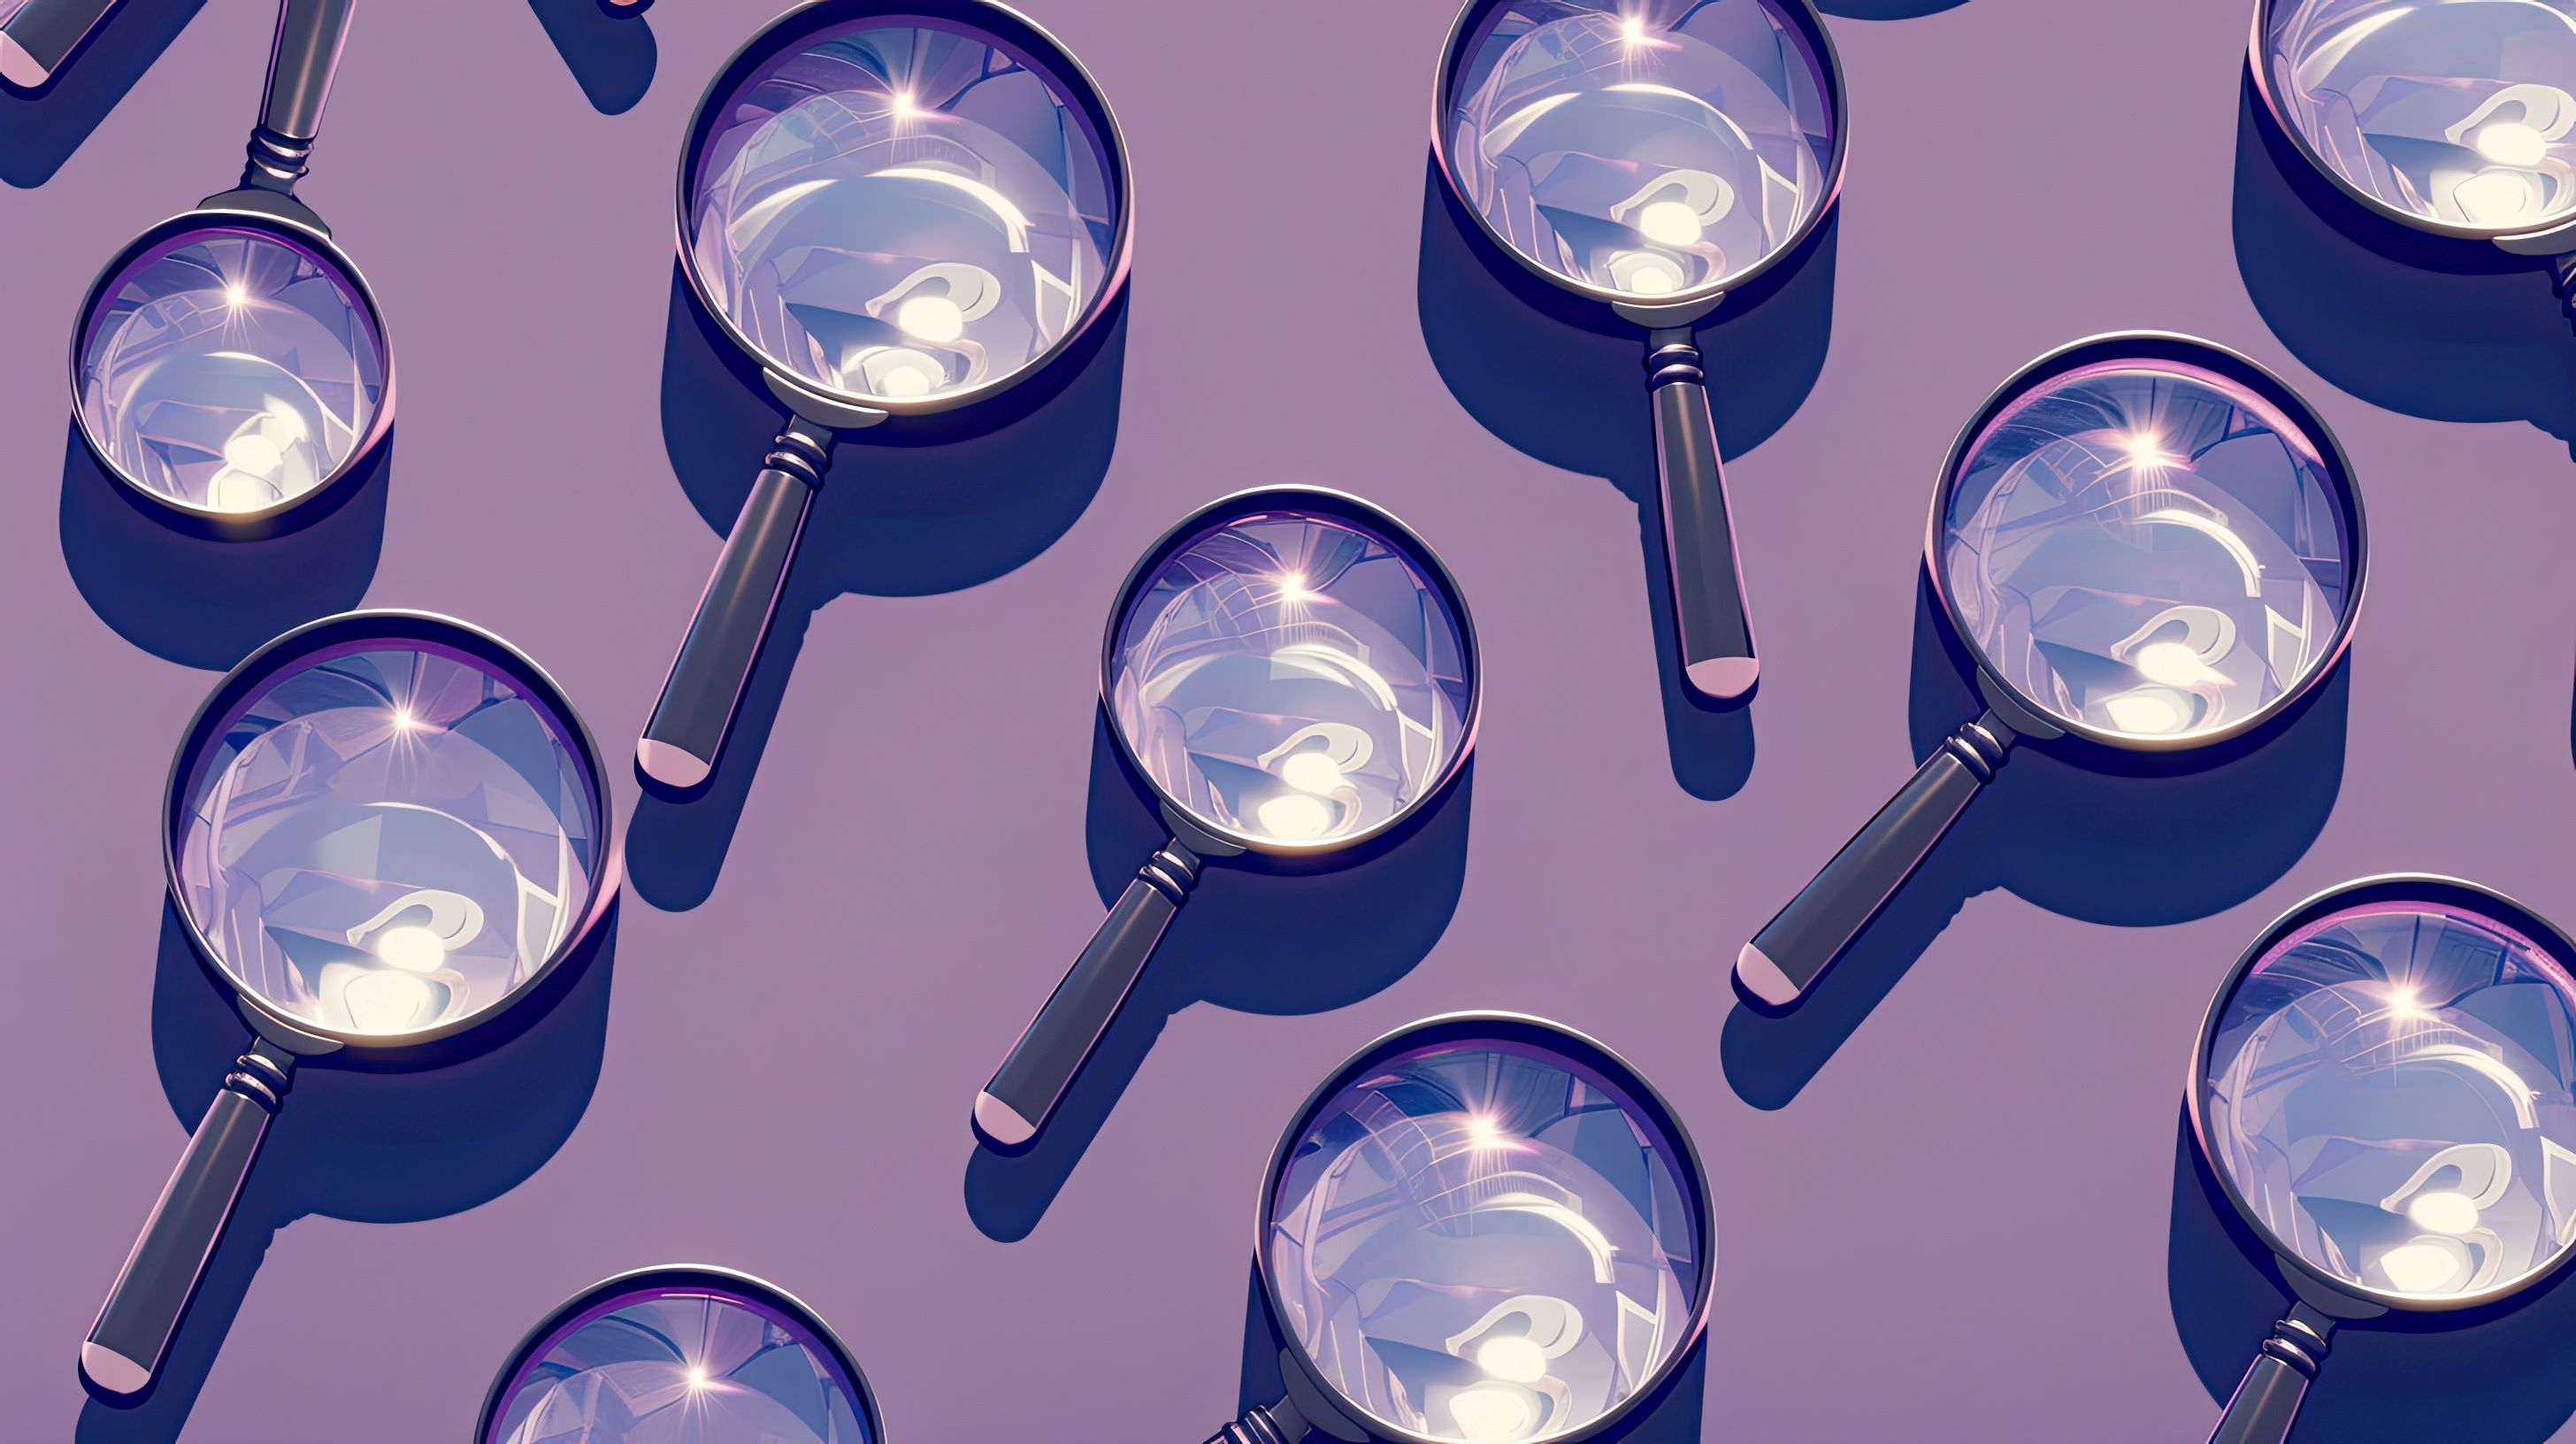 The image features an array of magnifying glasses laid out on a purple background. Each magnifying glass reflects light and shows a portion of an abstract design, creating a pattern that emphasizes the concept of examination, analysis, and detailed scrutiny. The repeated elements suggest a theme of thorough investigation or research.